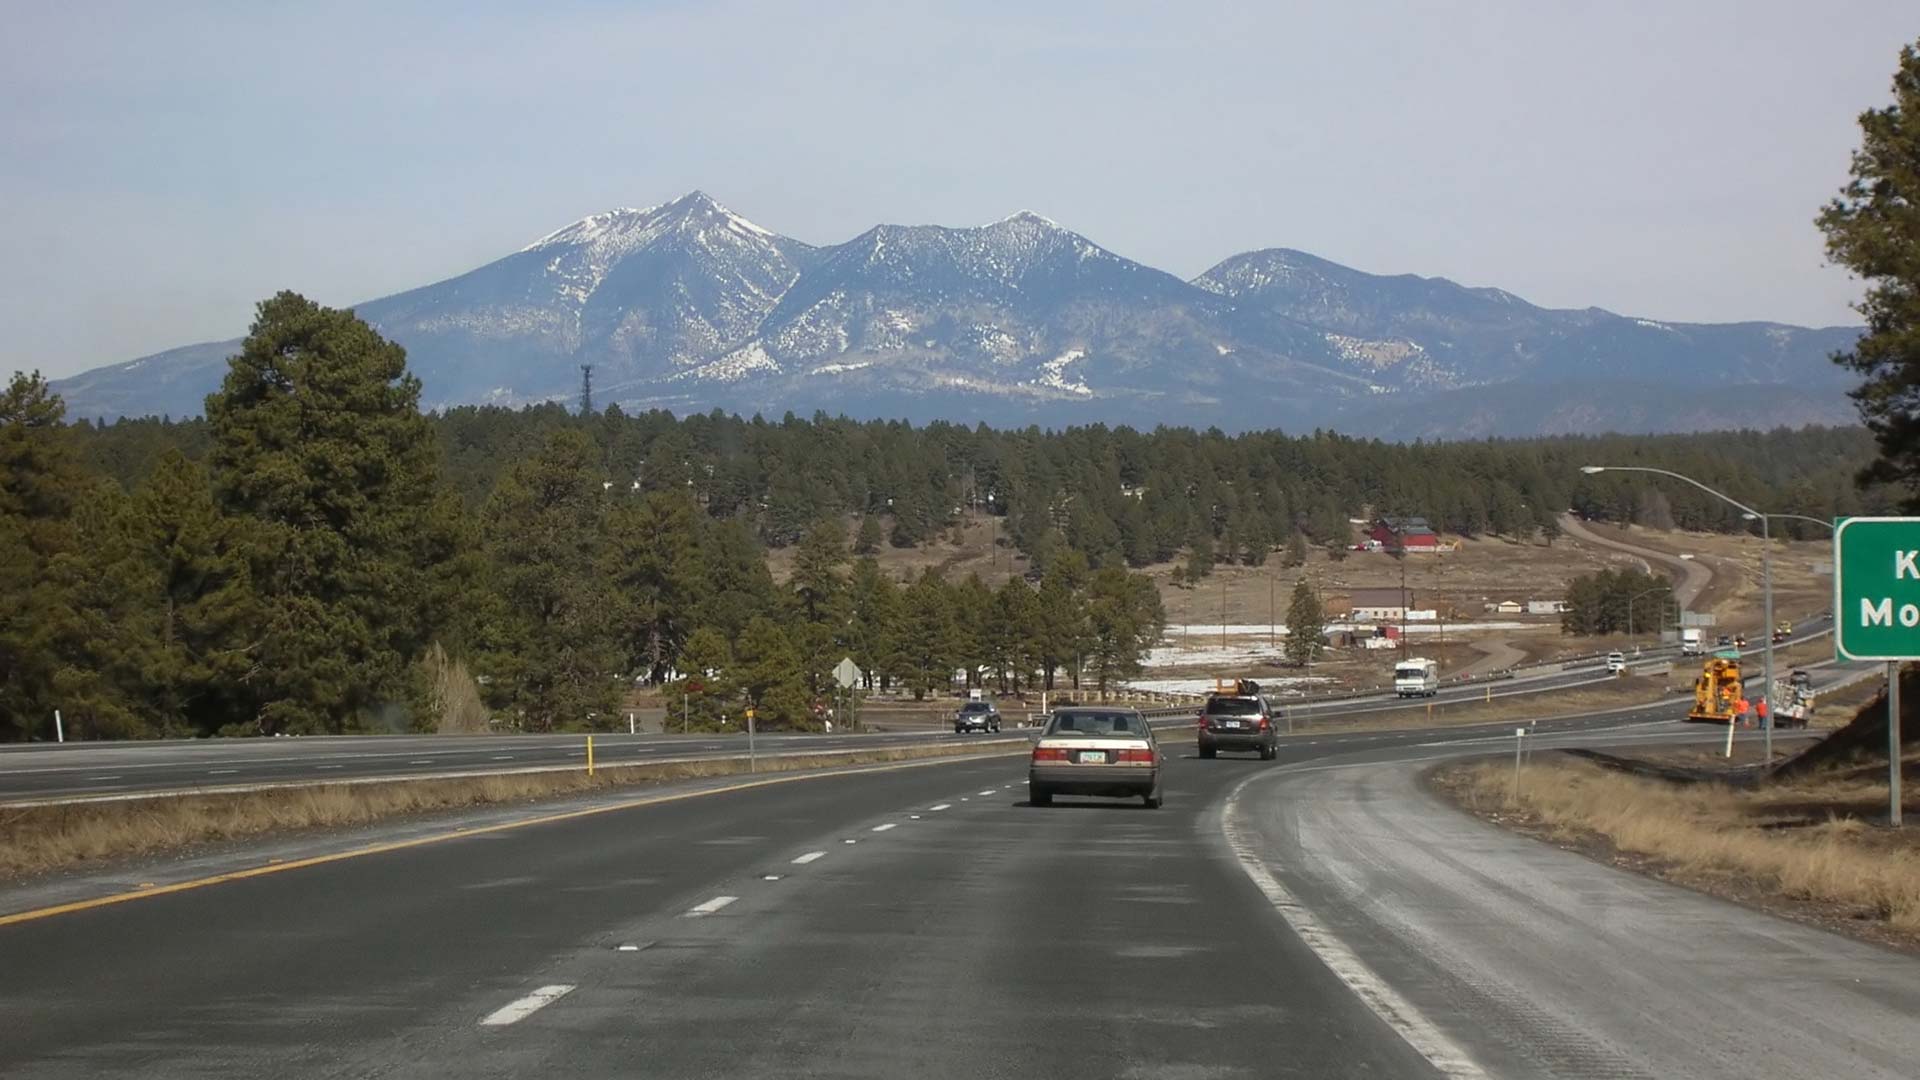 Interstate 17 near Flagstaff, Arizona, United States. The San Francisco Peaks are in the background.